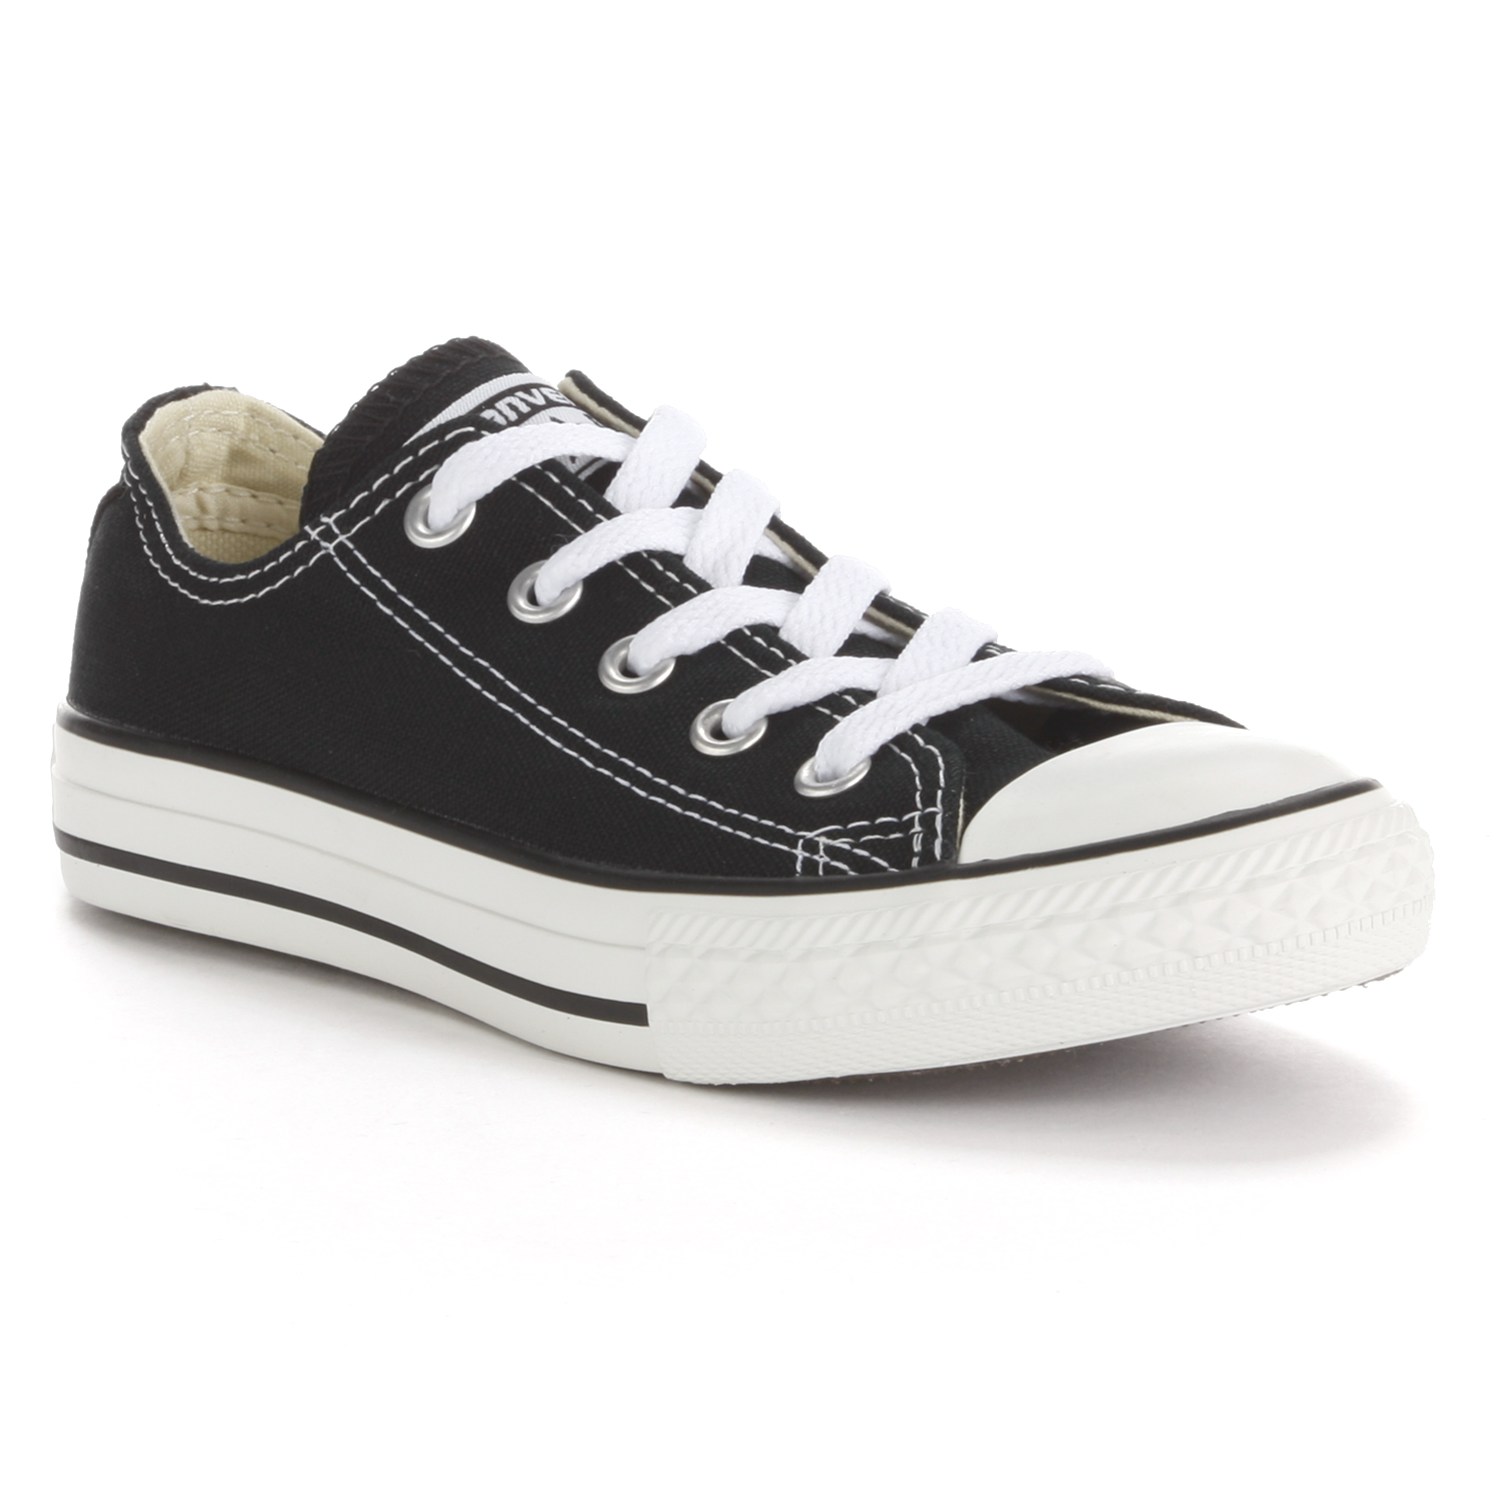 converse for girls converse clothing, shoes u0026 accessories | kohlu0027s SWQYLPE